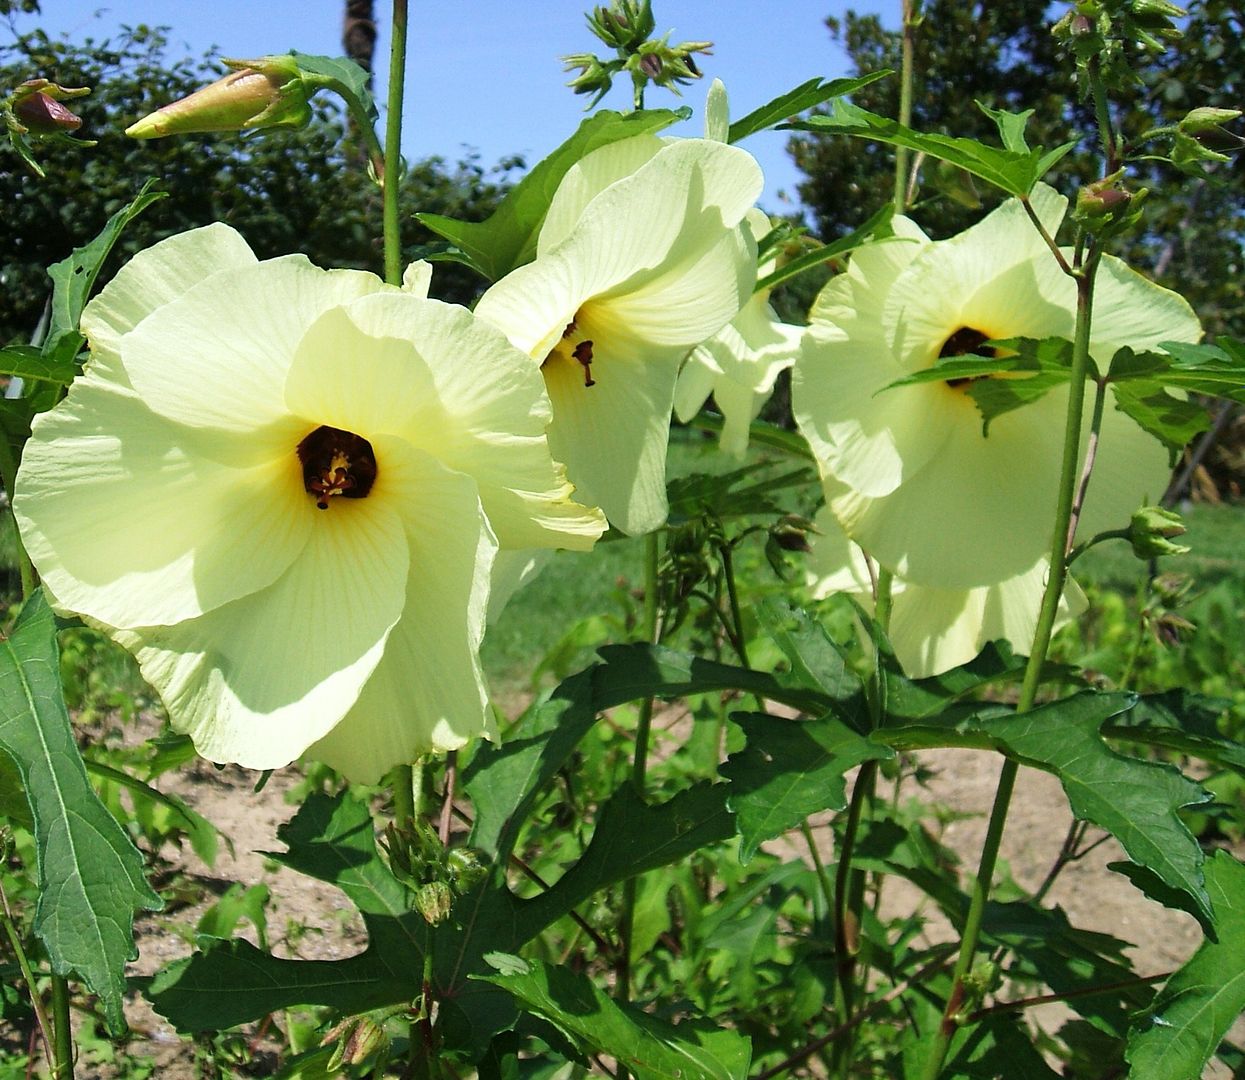 Edible Hibiscus flowers are a lovely pale yellow with a dark purple/maroon center.